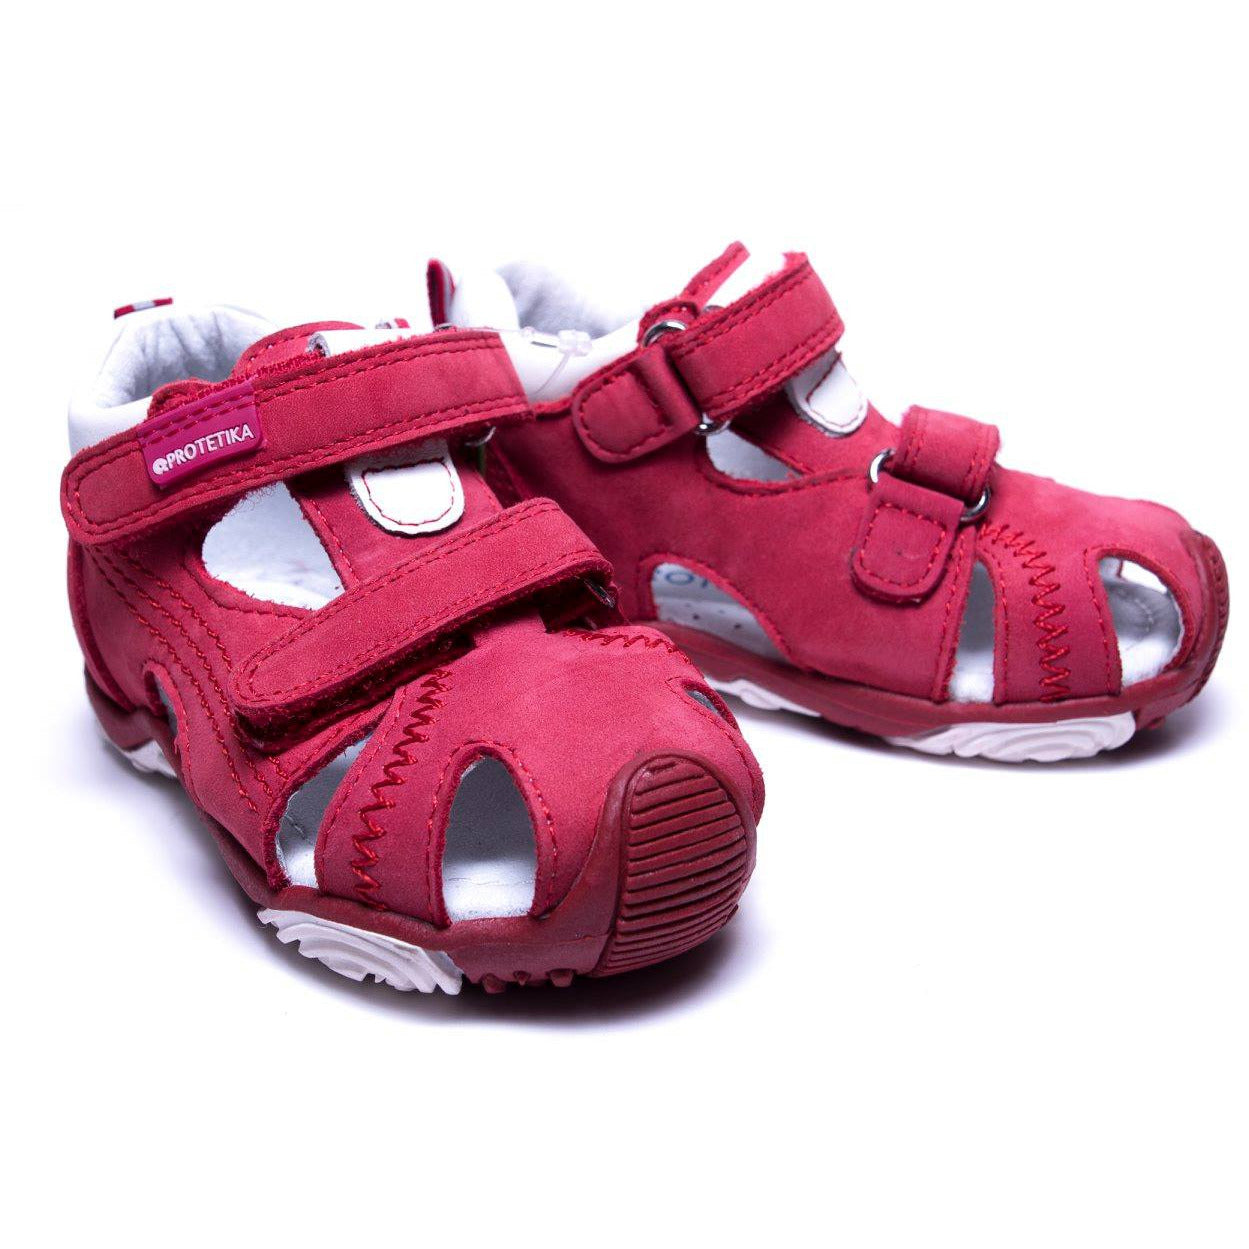 Genuine leather arch support sandals for toddler girls and boys, red white.